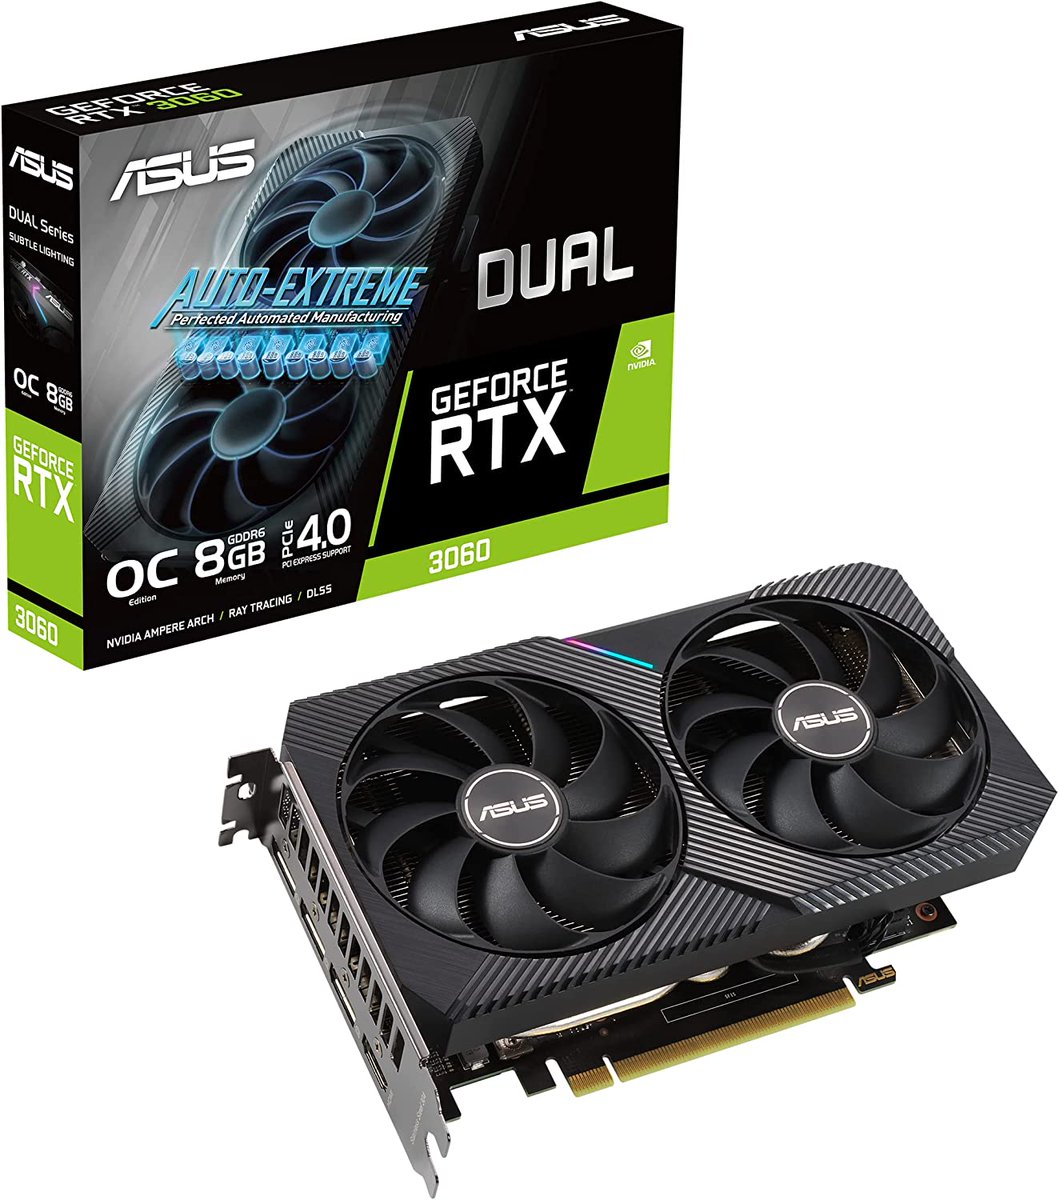 🔥 Dual NVIDIA GeForce RTX 3070 V2 OC Edition Gaming Graphics Card 🔥

✅ Deal Price: $399.99
❌ Was: $579.99

amzn.to/3P6S14j

#DealAlert #GamingGraphicsCard #NVIDIA #GeForceRTX3070 #GamingPerformance #GraphicsTechnology #DiscountedPrice #ElevateYourGaming